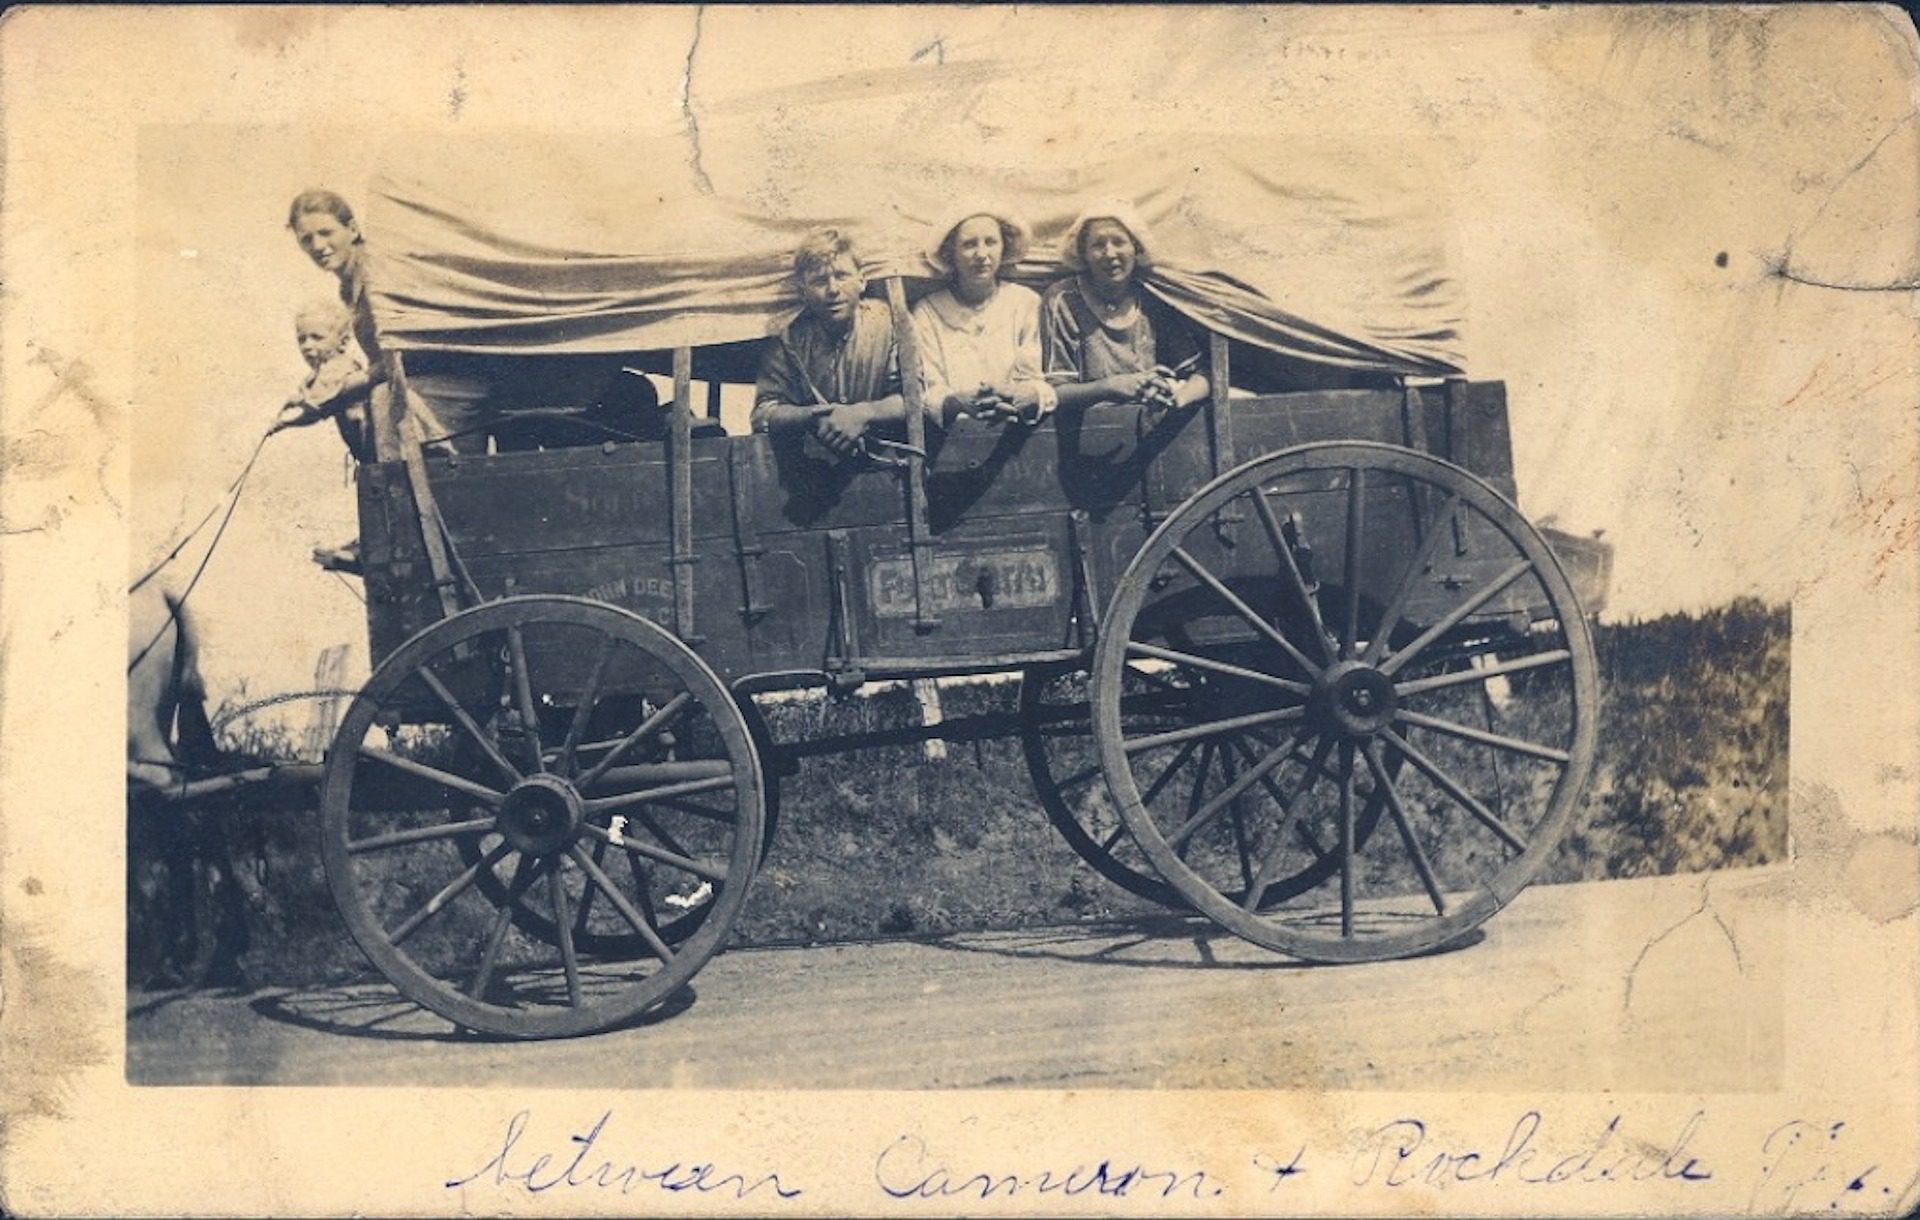 Old photo of a group of people in a covered wagon.